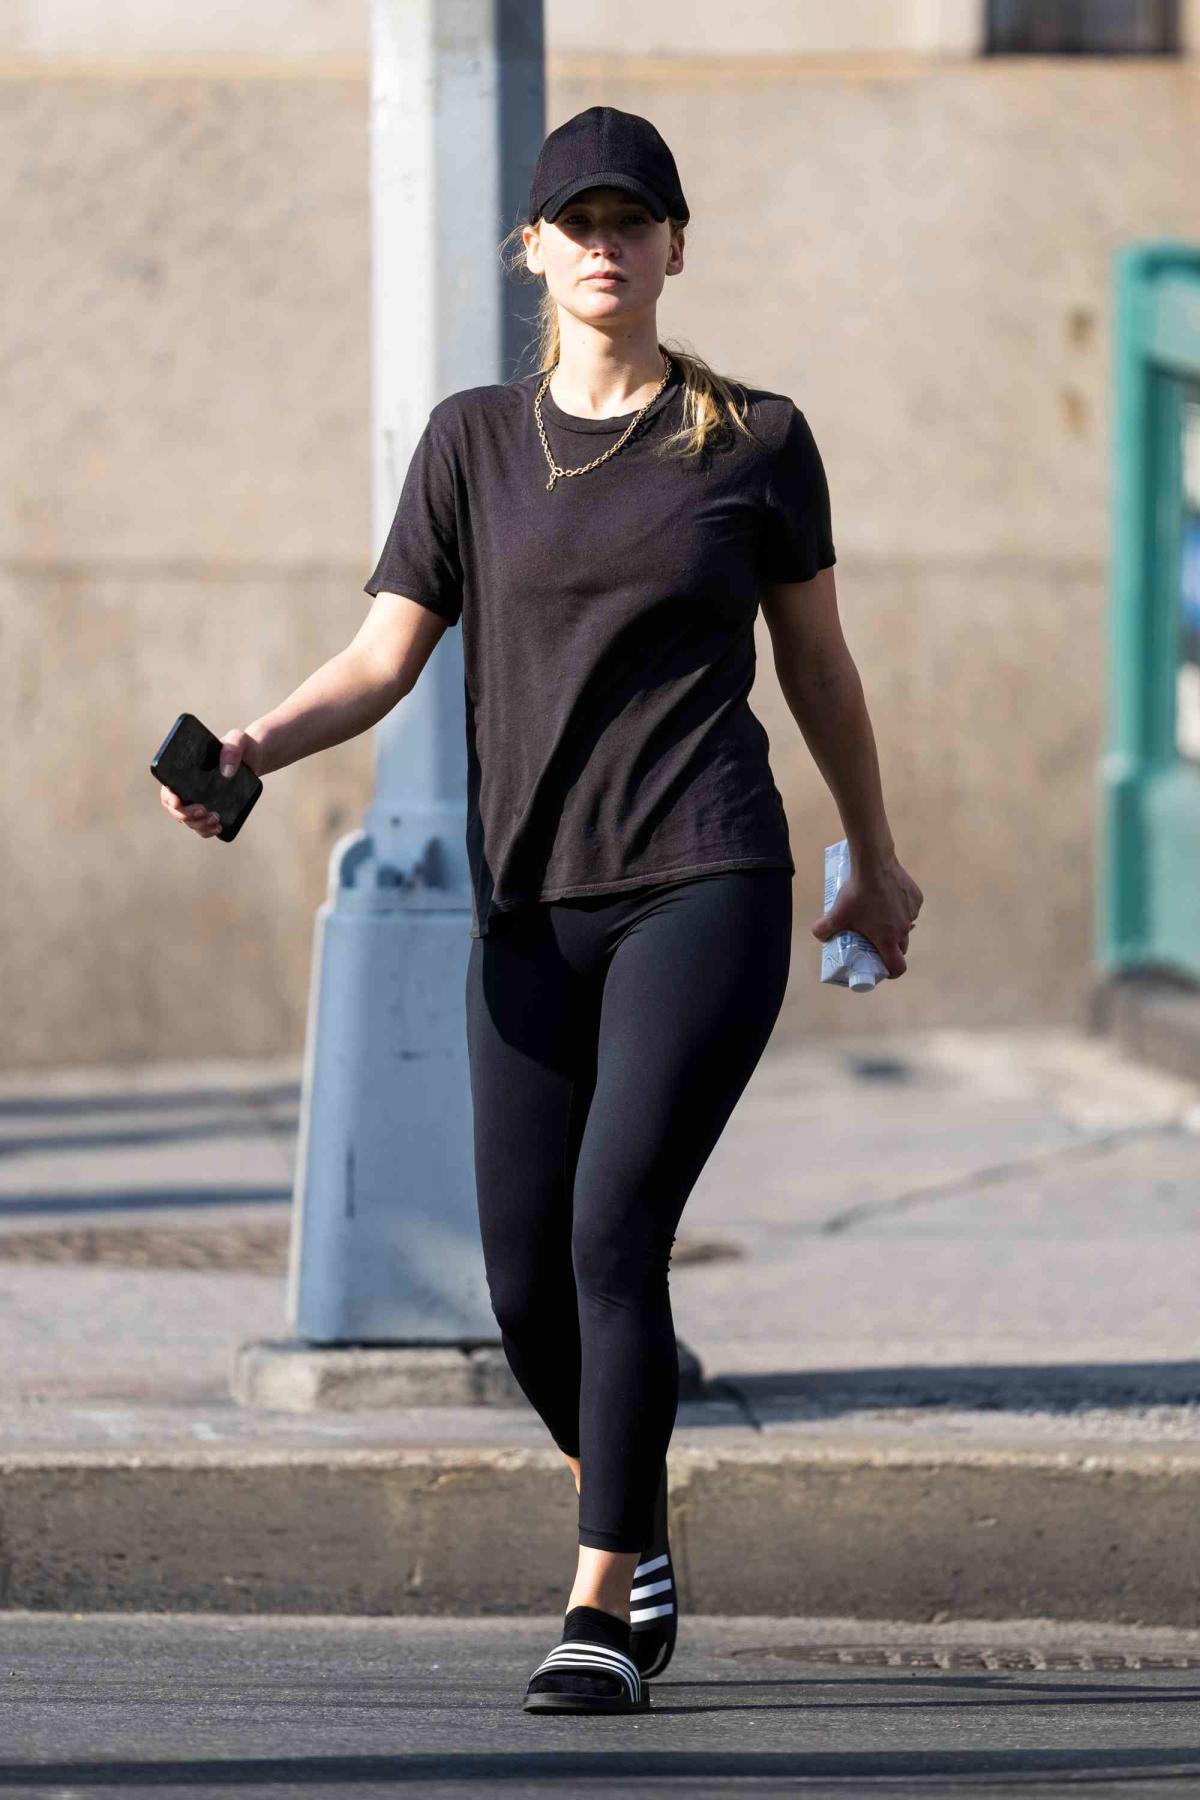 Jennifer Lawrence looks fit in a black tank top and leggings while heading  to the gym